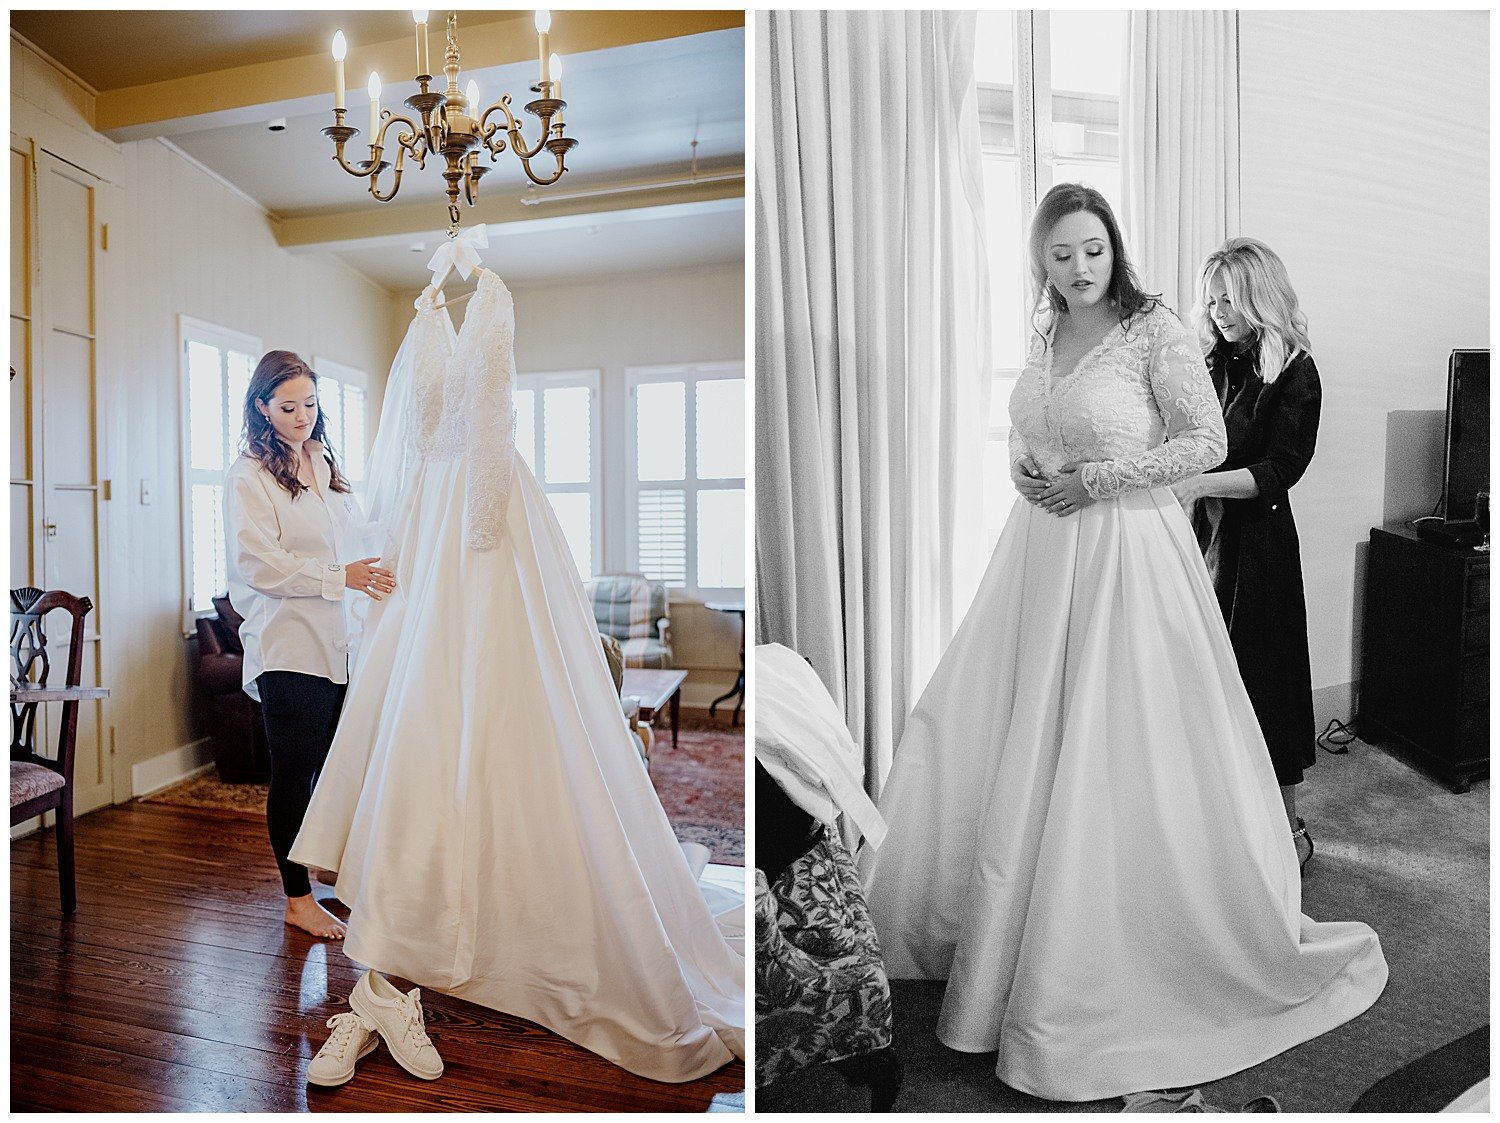 Two vertical images side-by-side show theShow the wedding dress hanging as a bride attentively handles it and the right image shows the bride in her dress being being held by her mother